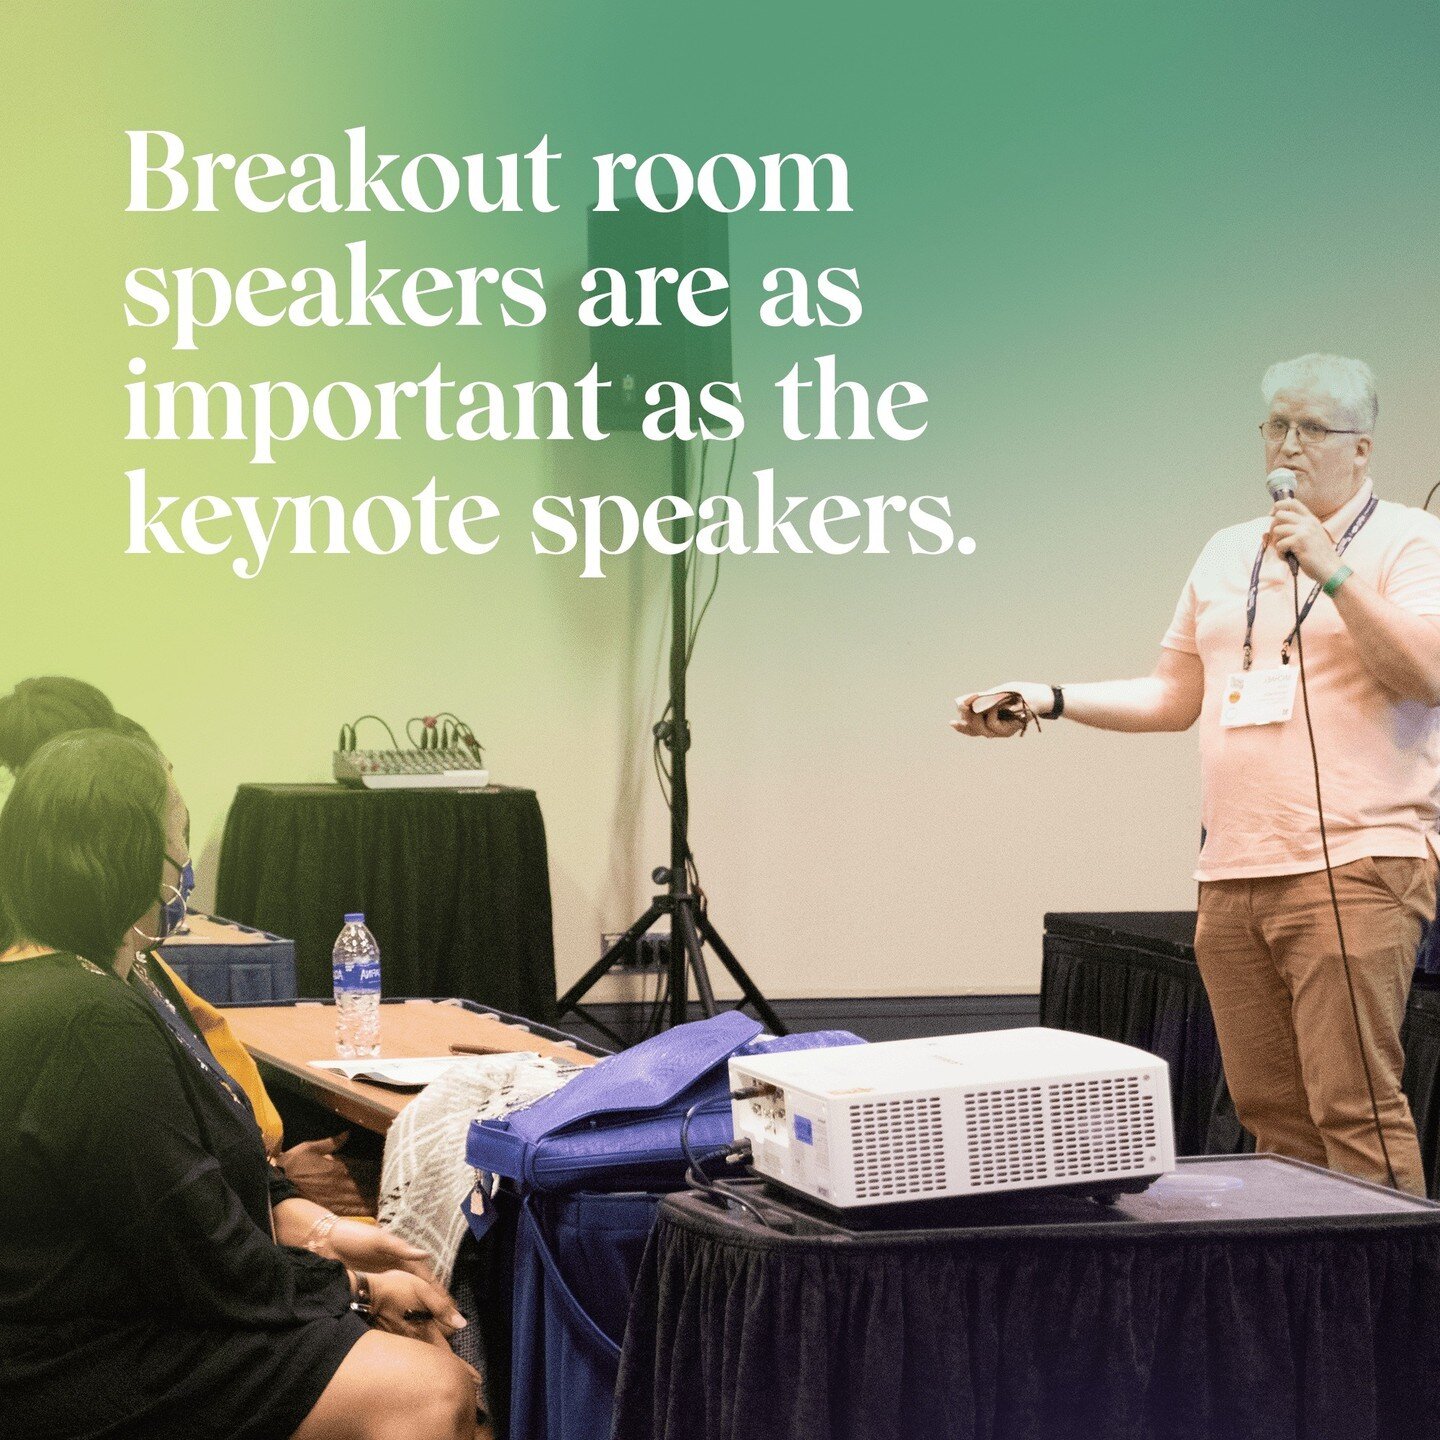 Team ELE goes above and beyond to ensure that all speakers at our events are comfortable and have everything they need to give a great presentation. We believe that every speaker, whether they're the keynote or breakout room speaker, is important and